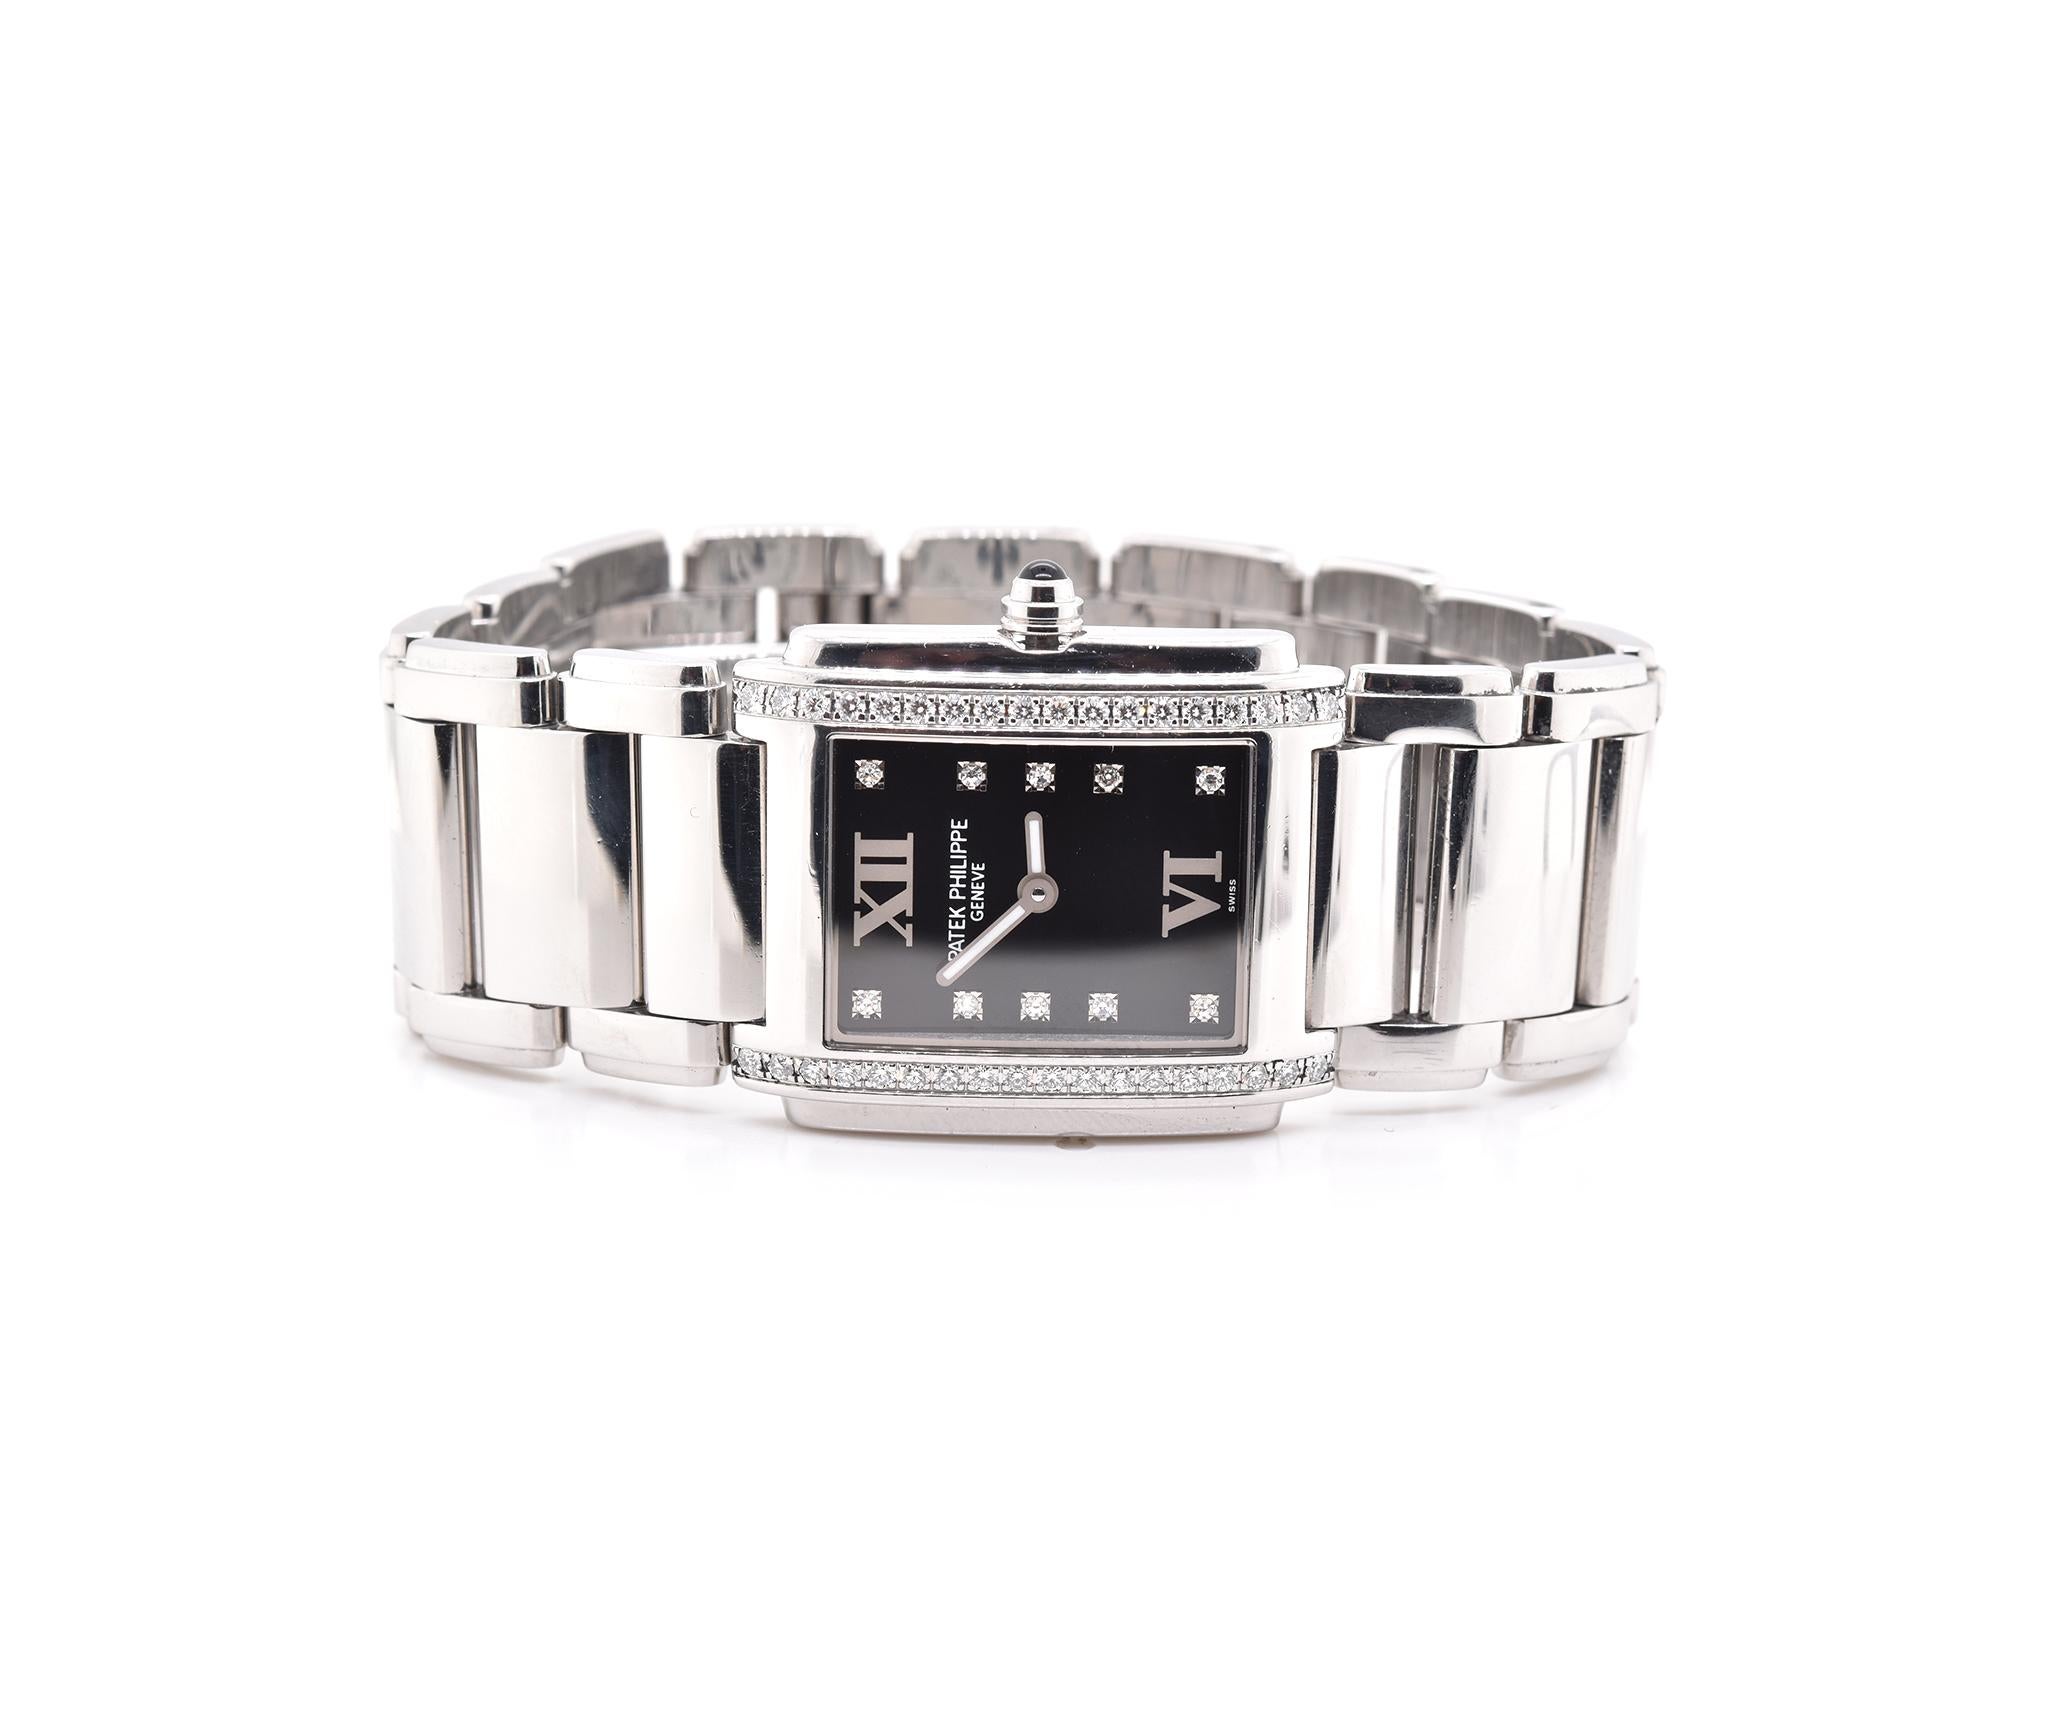 Movement: quartz, Caliber E15 
Function: hours, minutes
Case: 25 X 30mm stainless steel rectangle case, sapphire crystal
Dial: “Forever Black” diamond hour markers
Band: Patek Philippe stainless steel bracelet with fold-over clasp
Reference #: